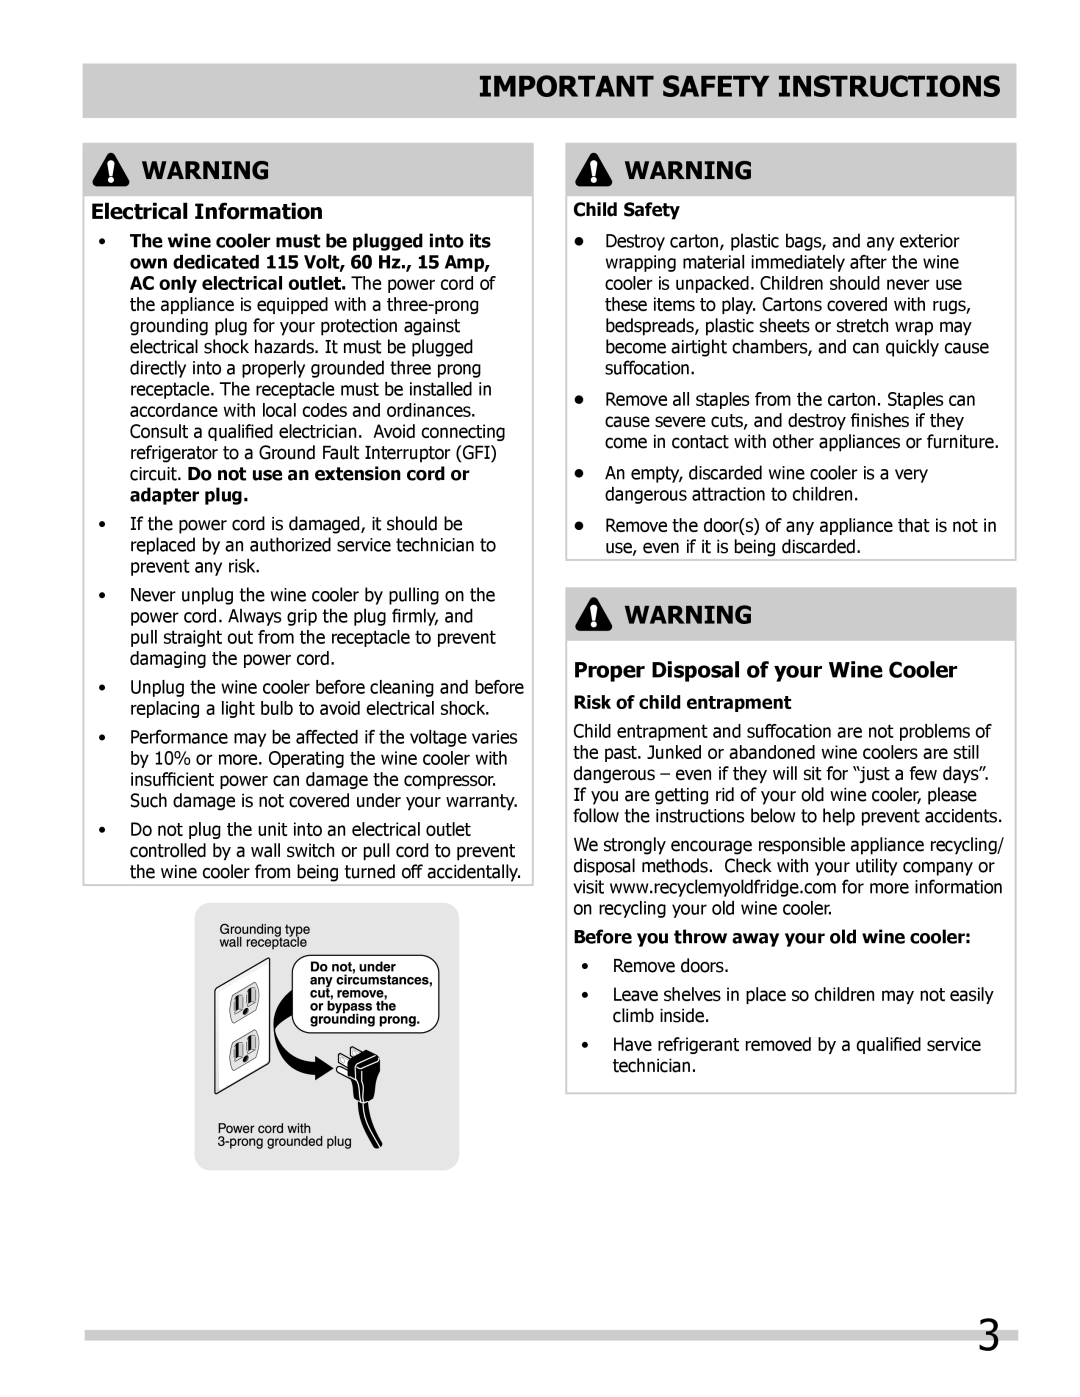 Frigidaire 242101800 Important Safety Instructions, Electrical Information, Proper Disposal of your Wine Cooler 